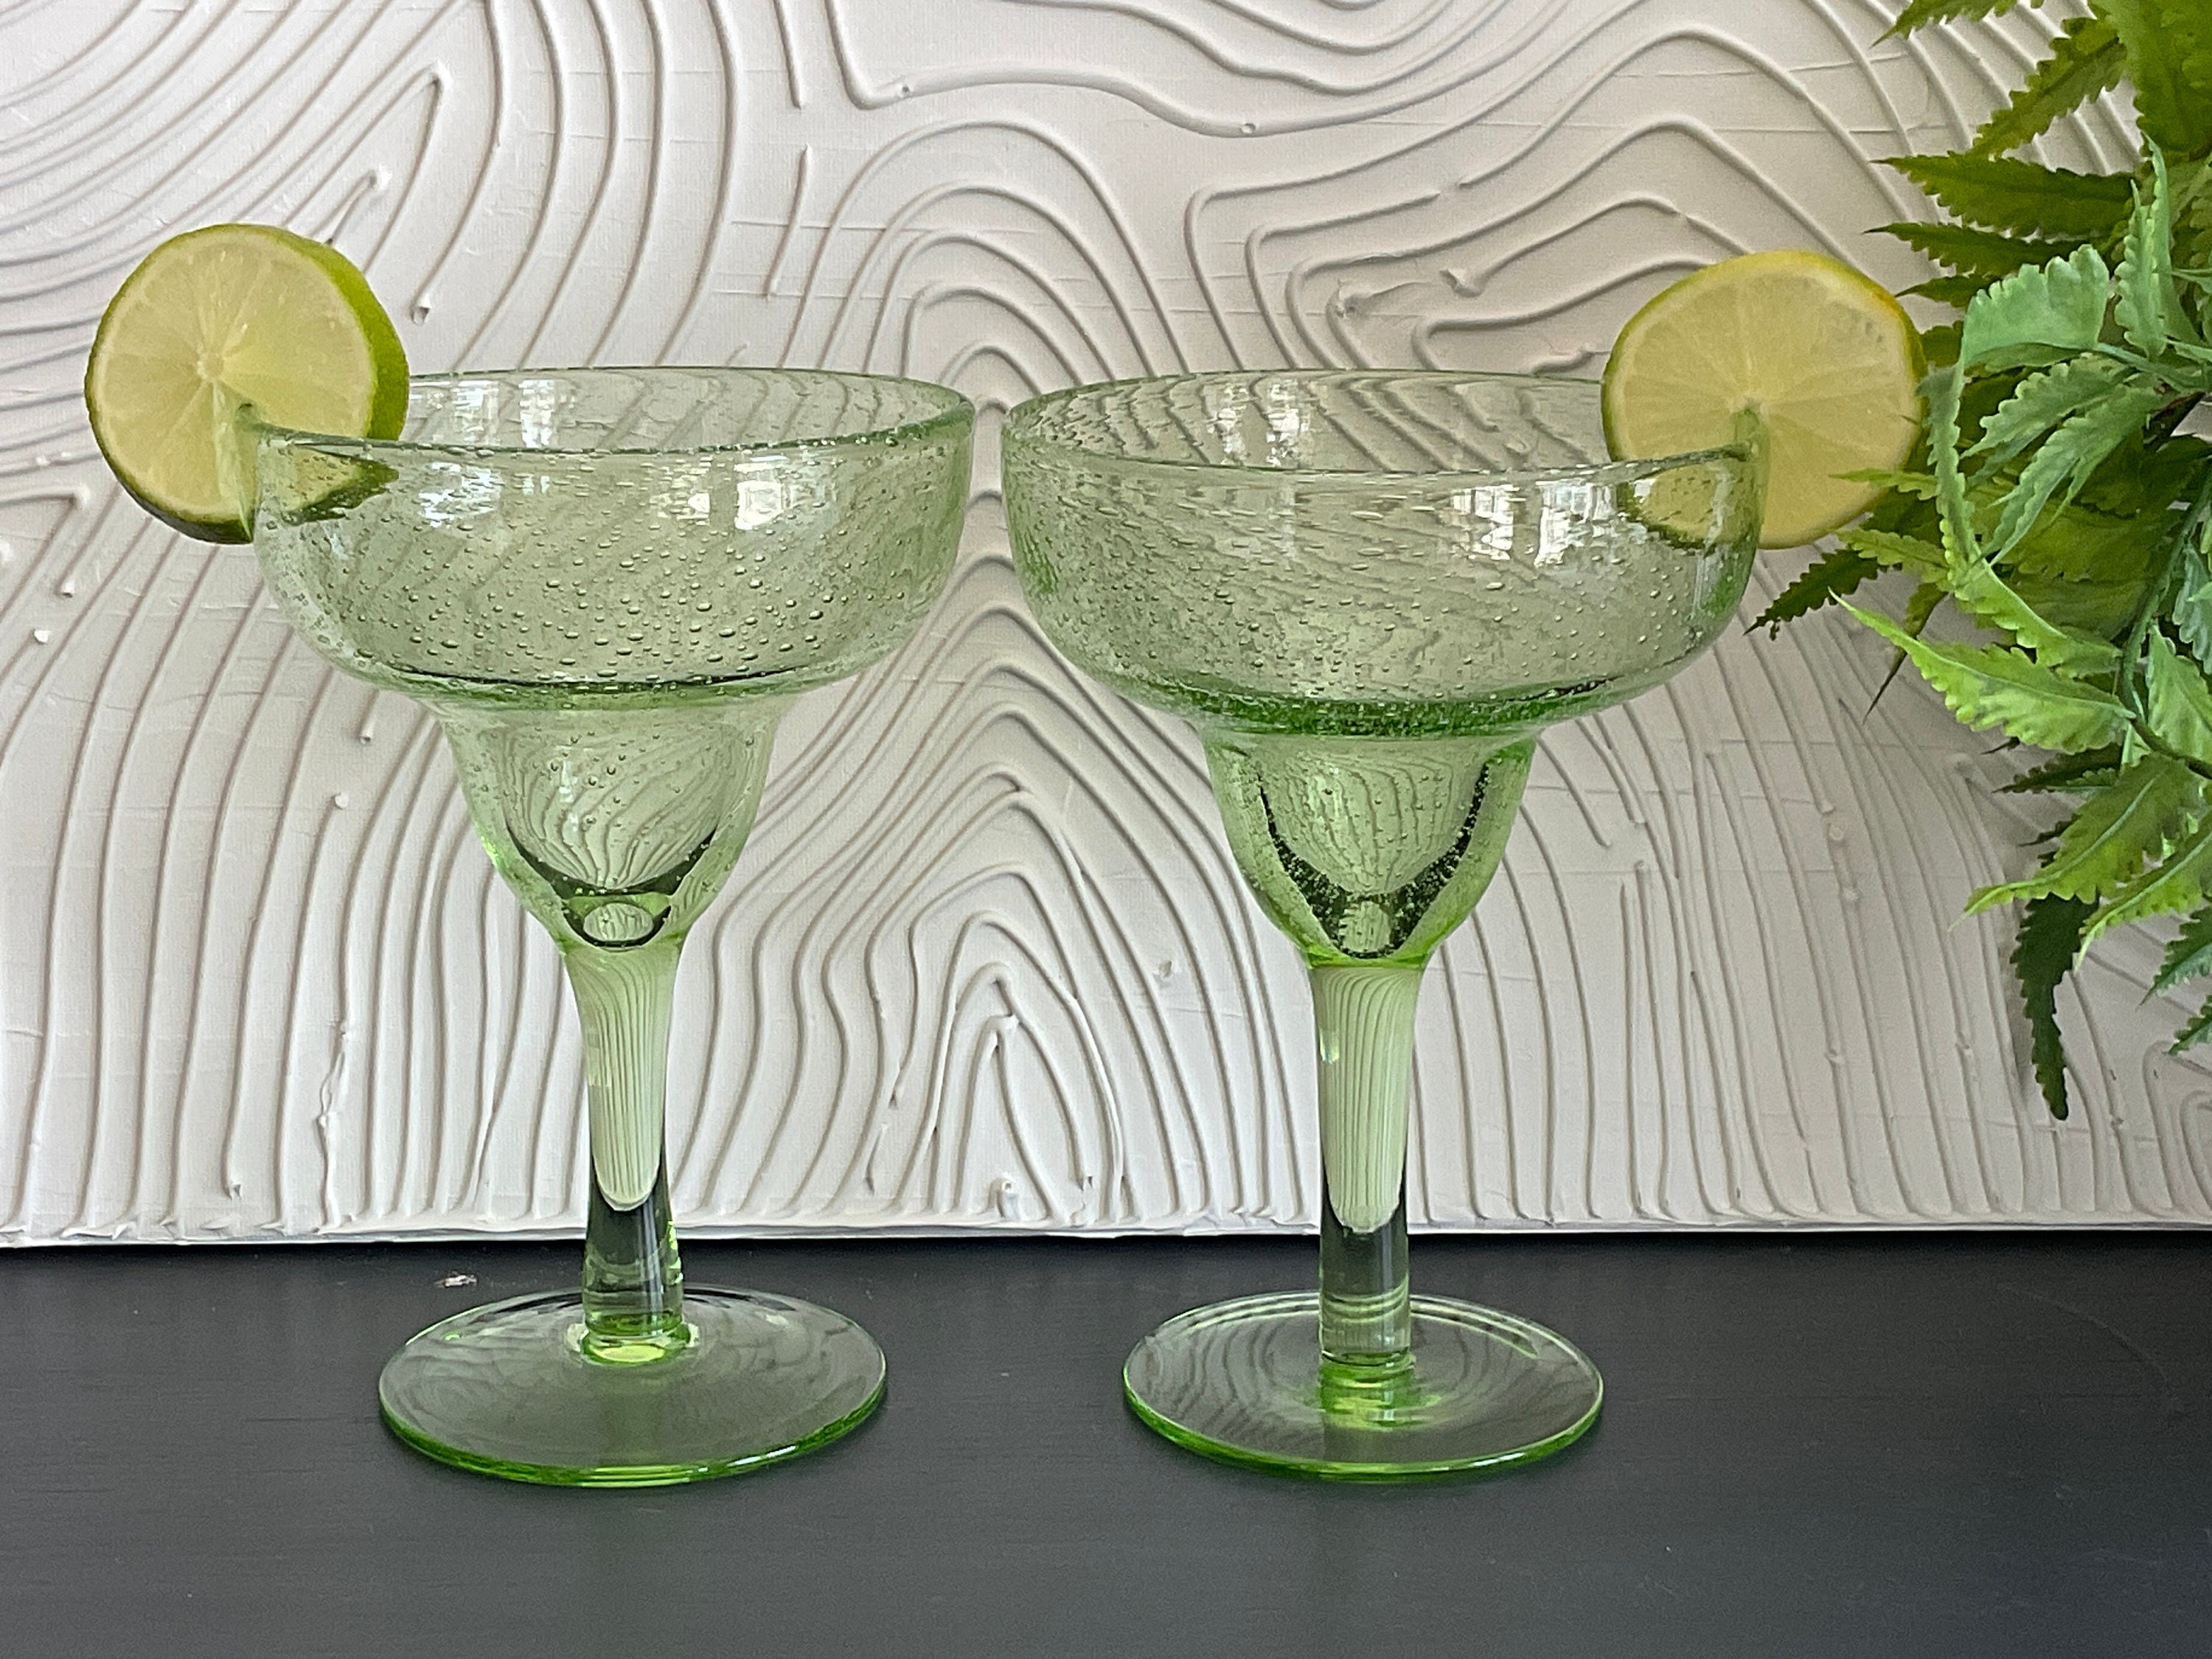 Double Wall Classic Margarita Glasses, Unique Shaped Insulated Barware,  High Quality and Freezer Safe, Great Gift for Mixed Drinks, 12-ounce 